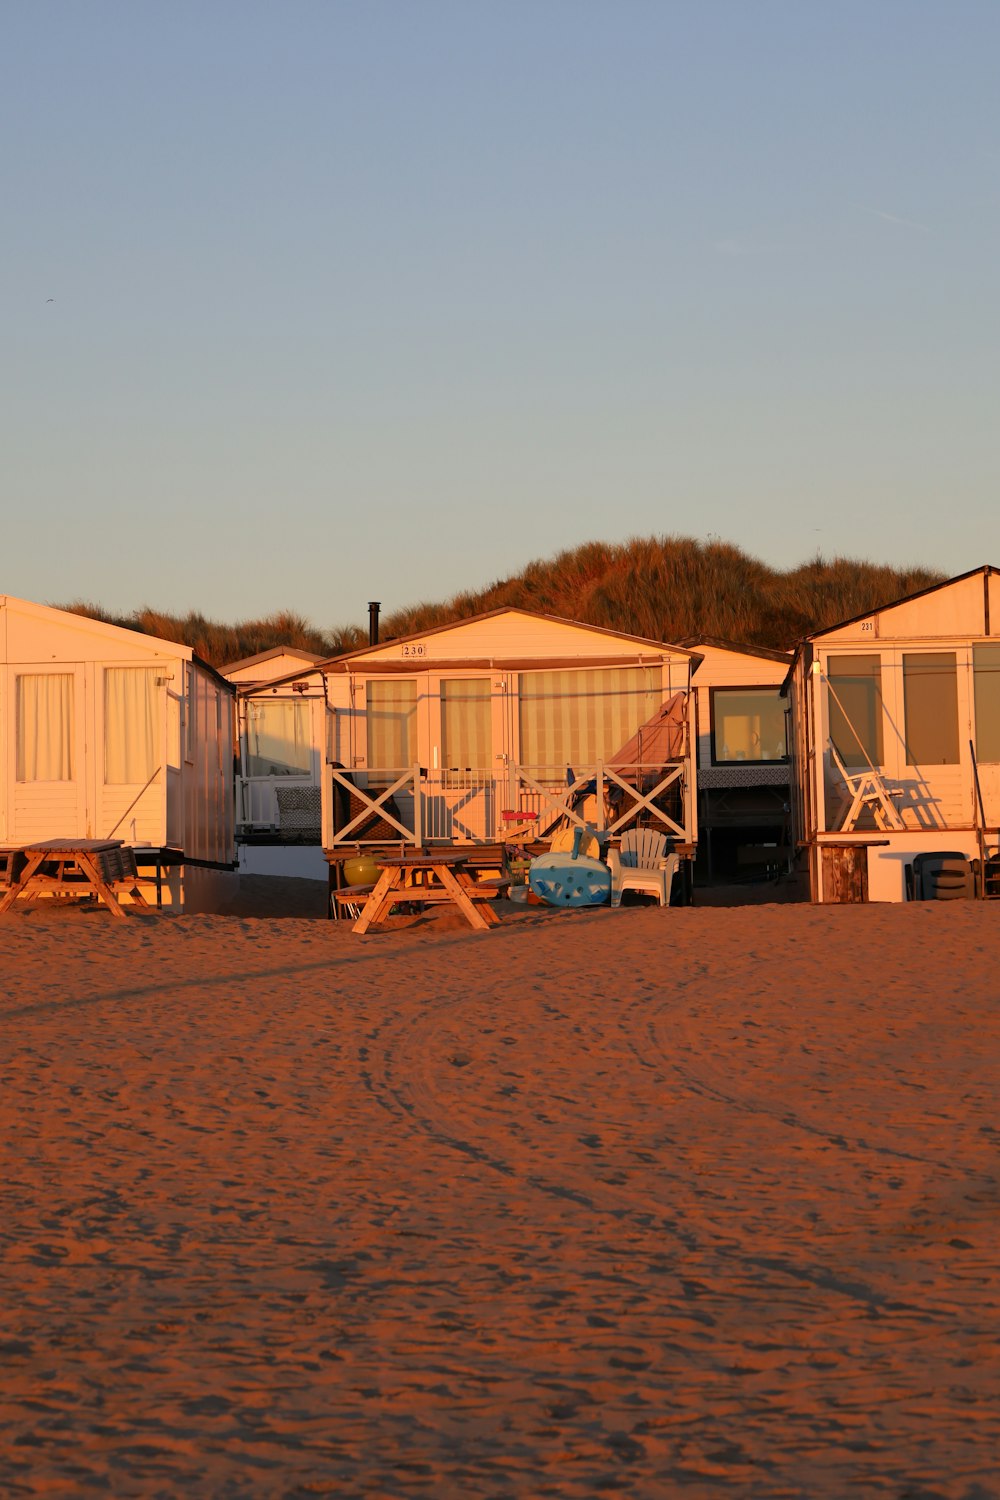 a row of beach huts sitting on top of a sandy beach